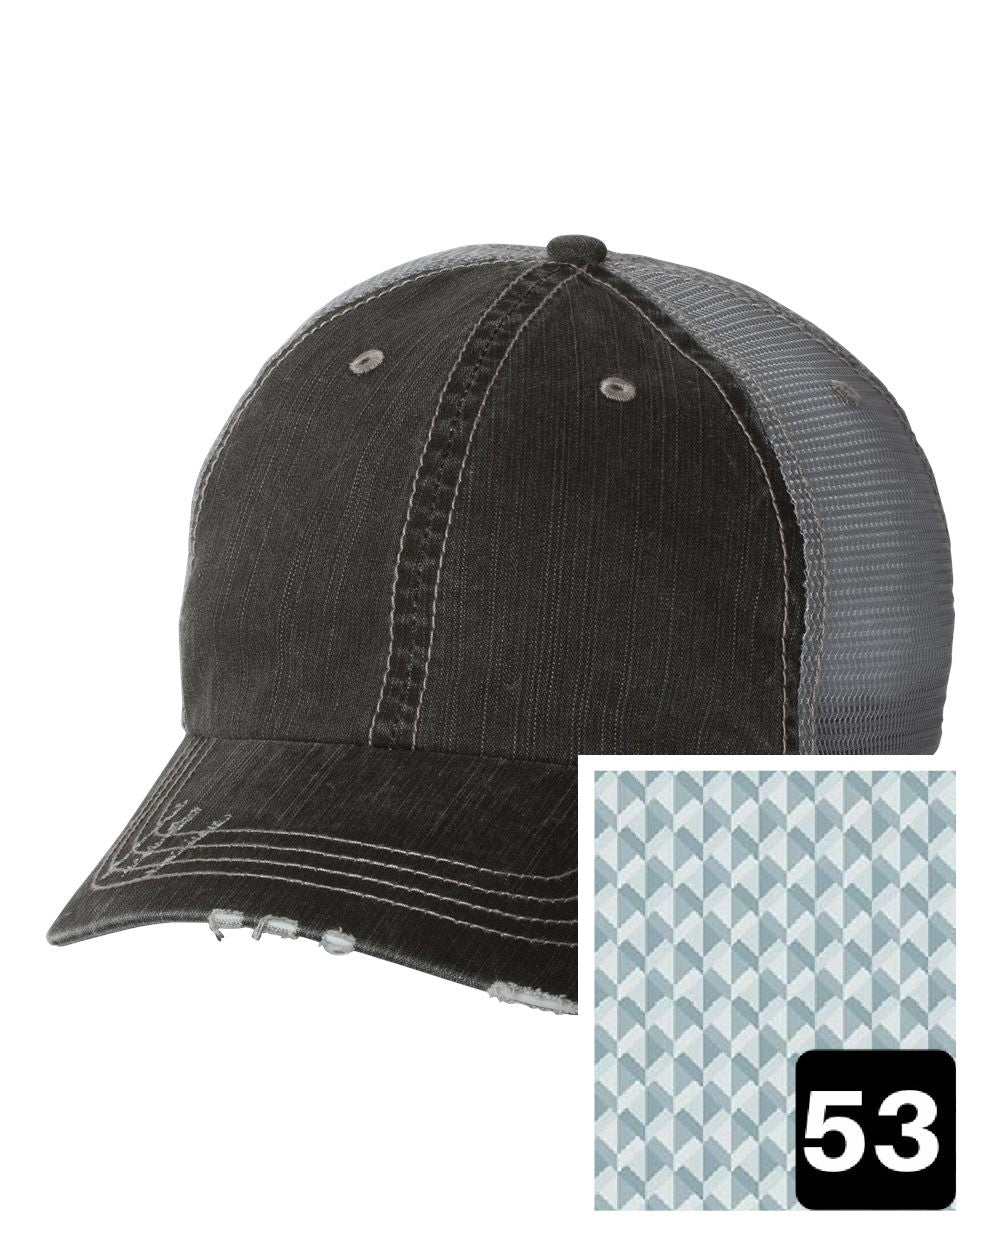 gray distressed trucker hat with multi-color stripe fabric state of Rhode Island